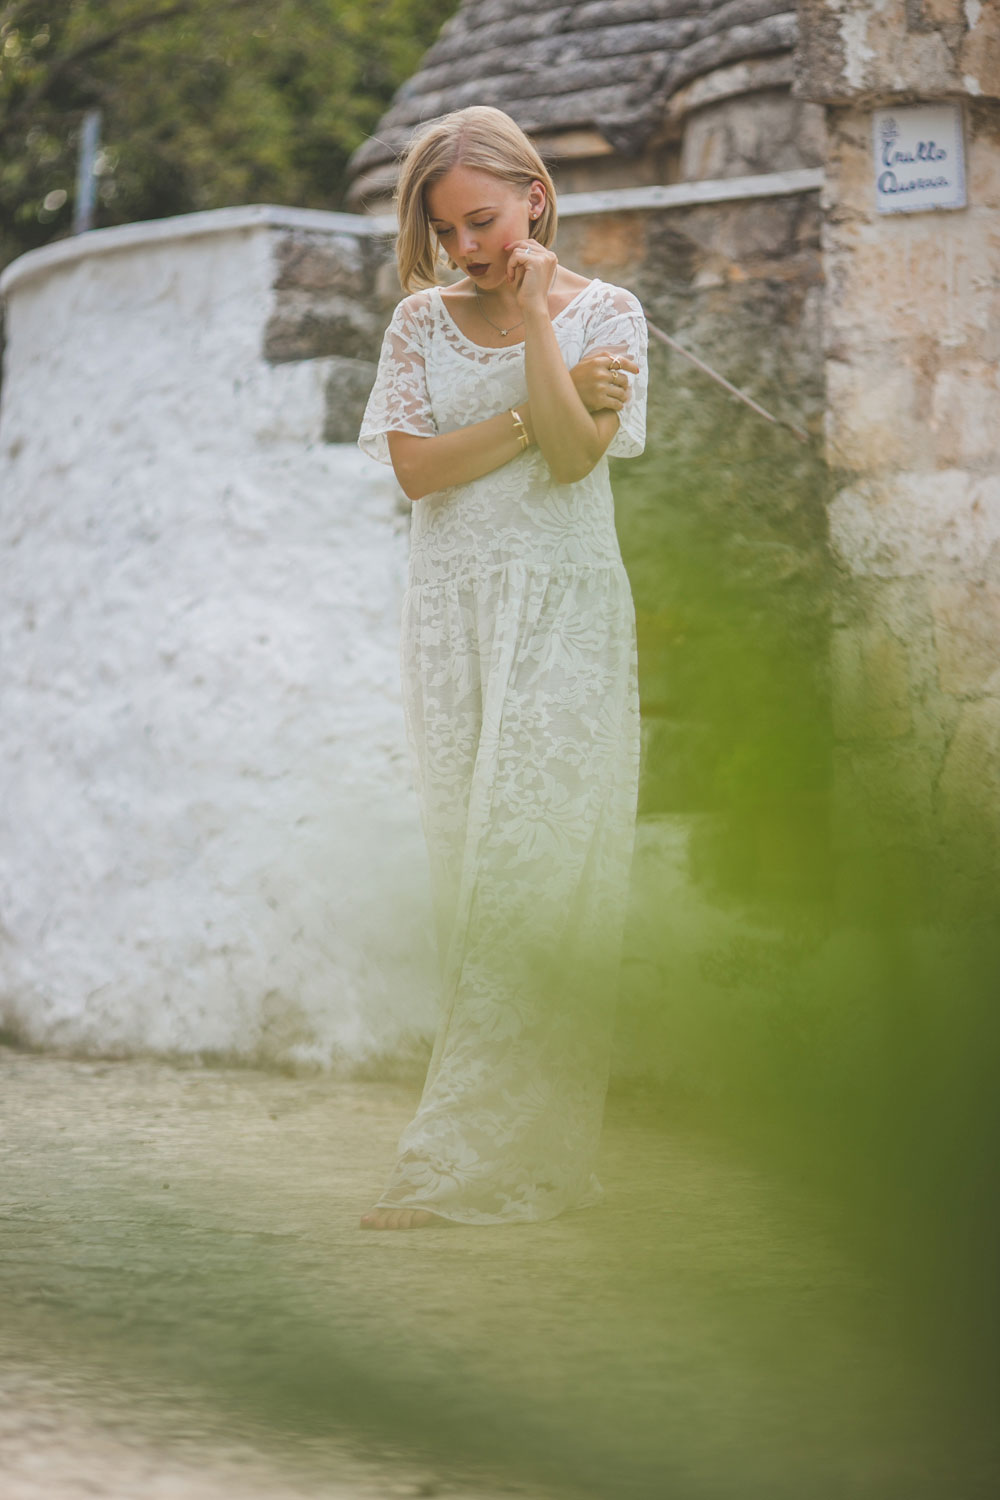 darya-kamalova-thecablook-fashion-lifestyle-blogger-from-thecablook-com-in-agri-trulli-in-puglia-south-italy-wearing-gat-rimon-white-maxi-lace-dress-3967